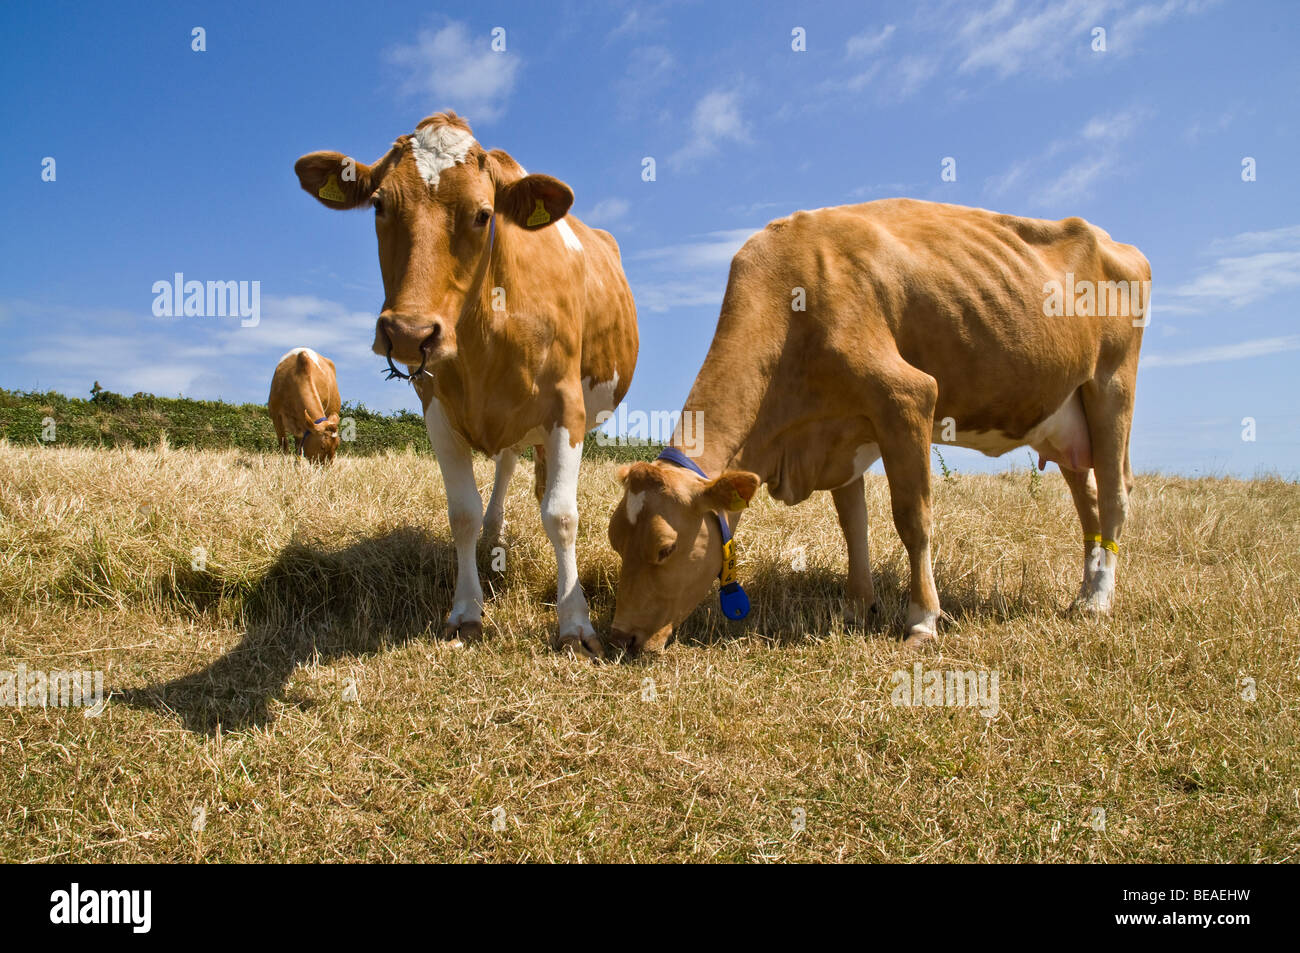 dh Guernsey milk cows ANIMAL GUERNSEY In stubbled field dairy milking two farmland cattle uk pair of Guernsey cow Stock Photo